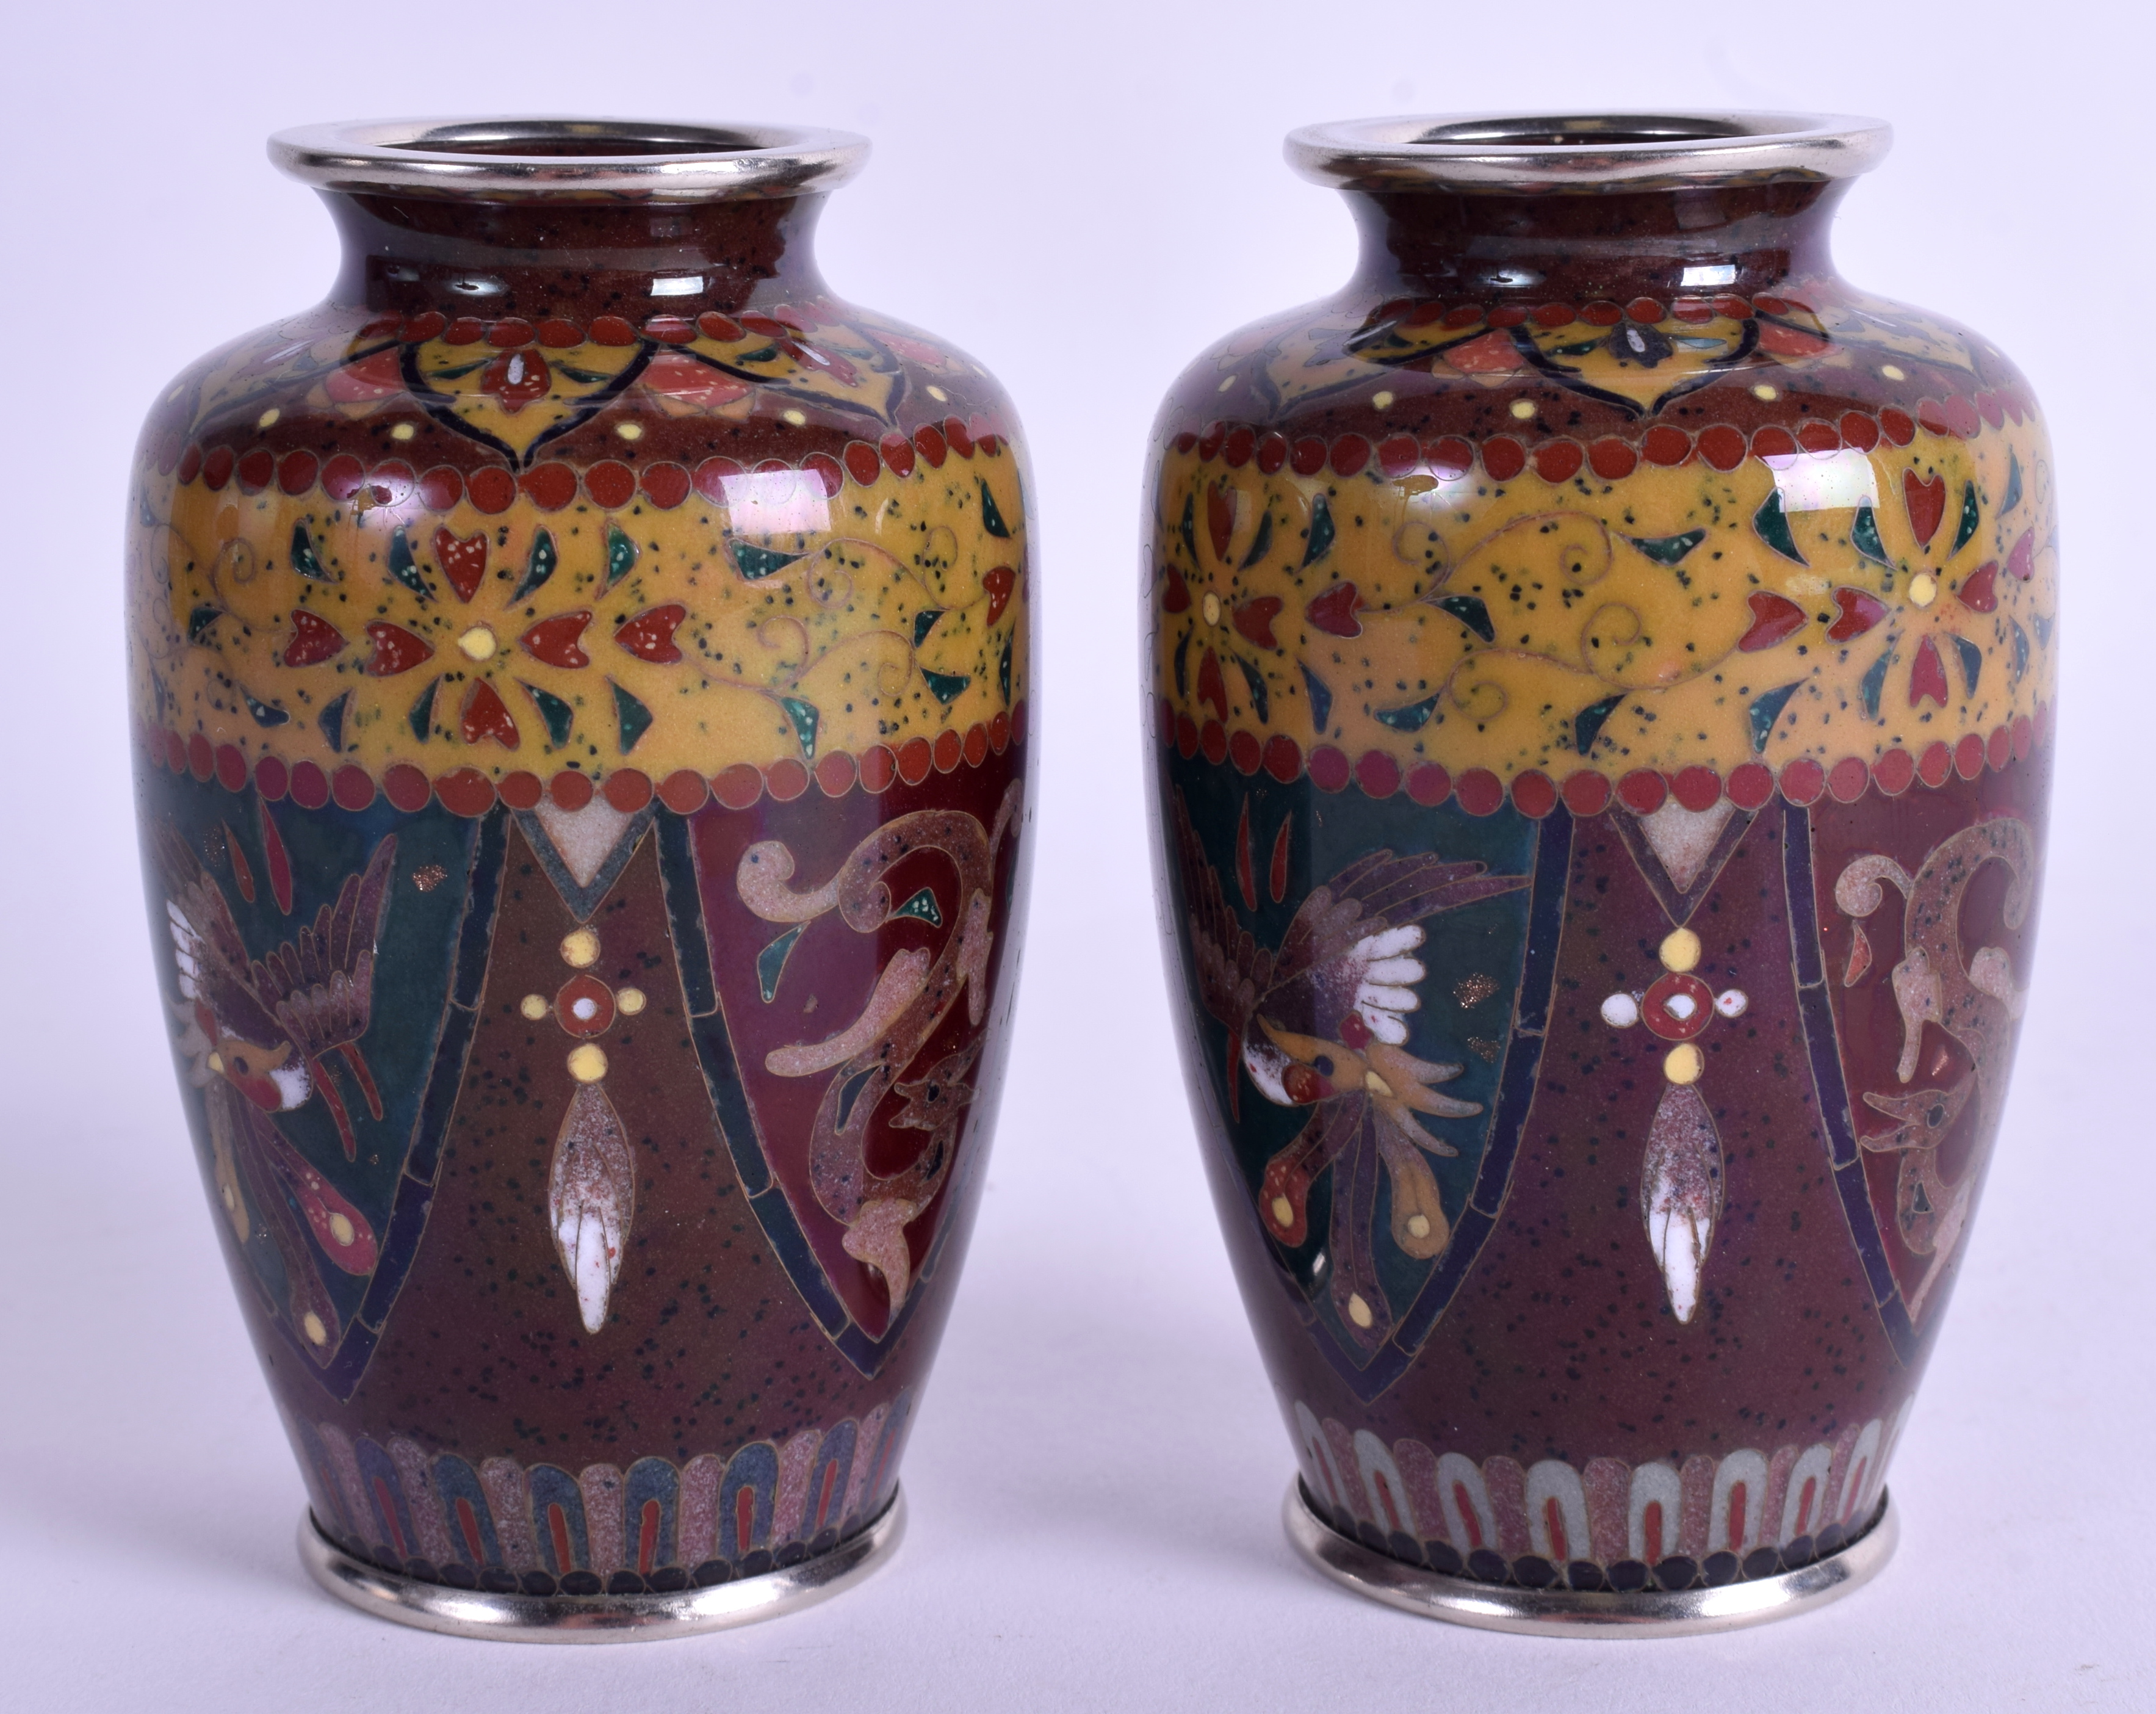 A PAIR OF EARLY 20TH CENTURY JAPANESE MEIJI PERIOD SILVER CLOISONNÉ ENAMEL VASES. 9.75 cm high. - Image 2 of 3